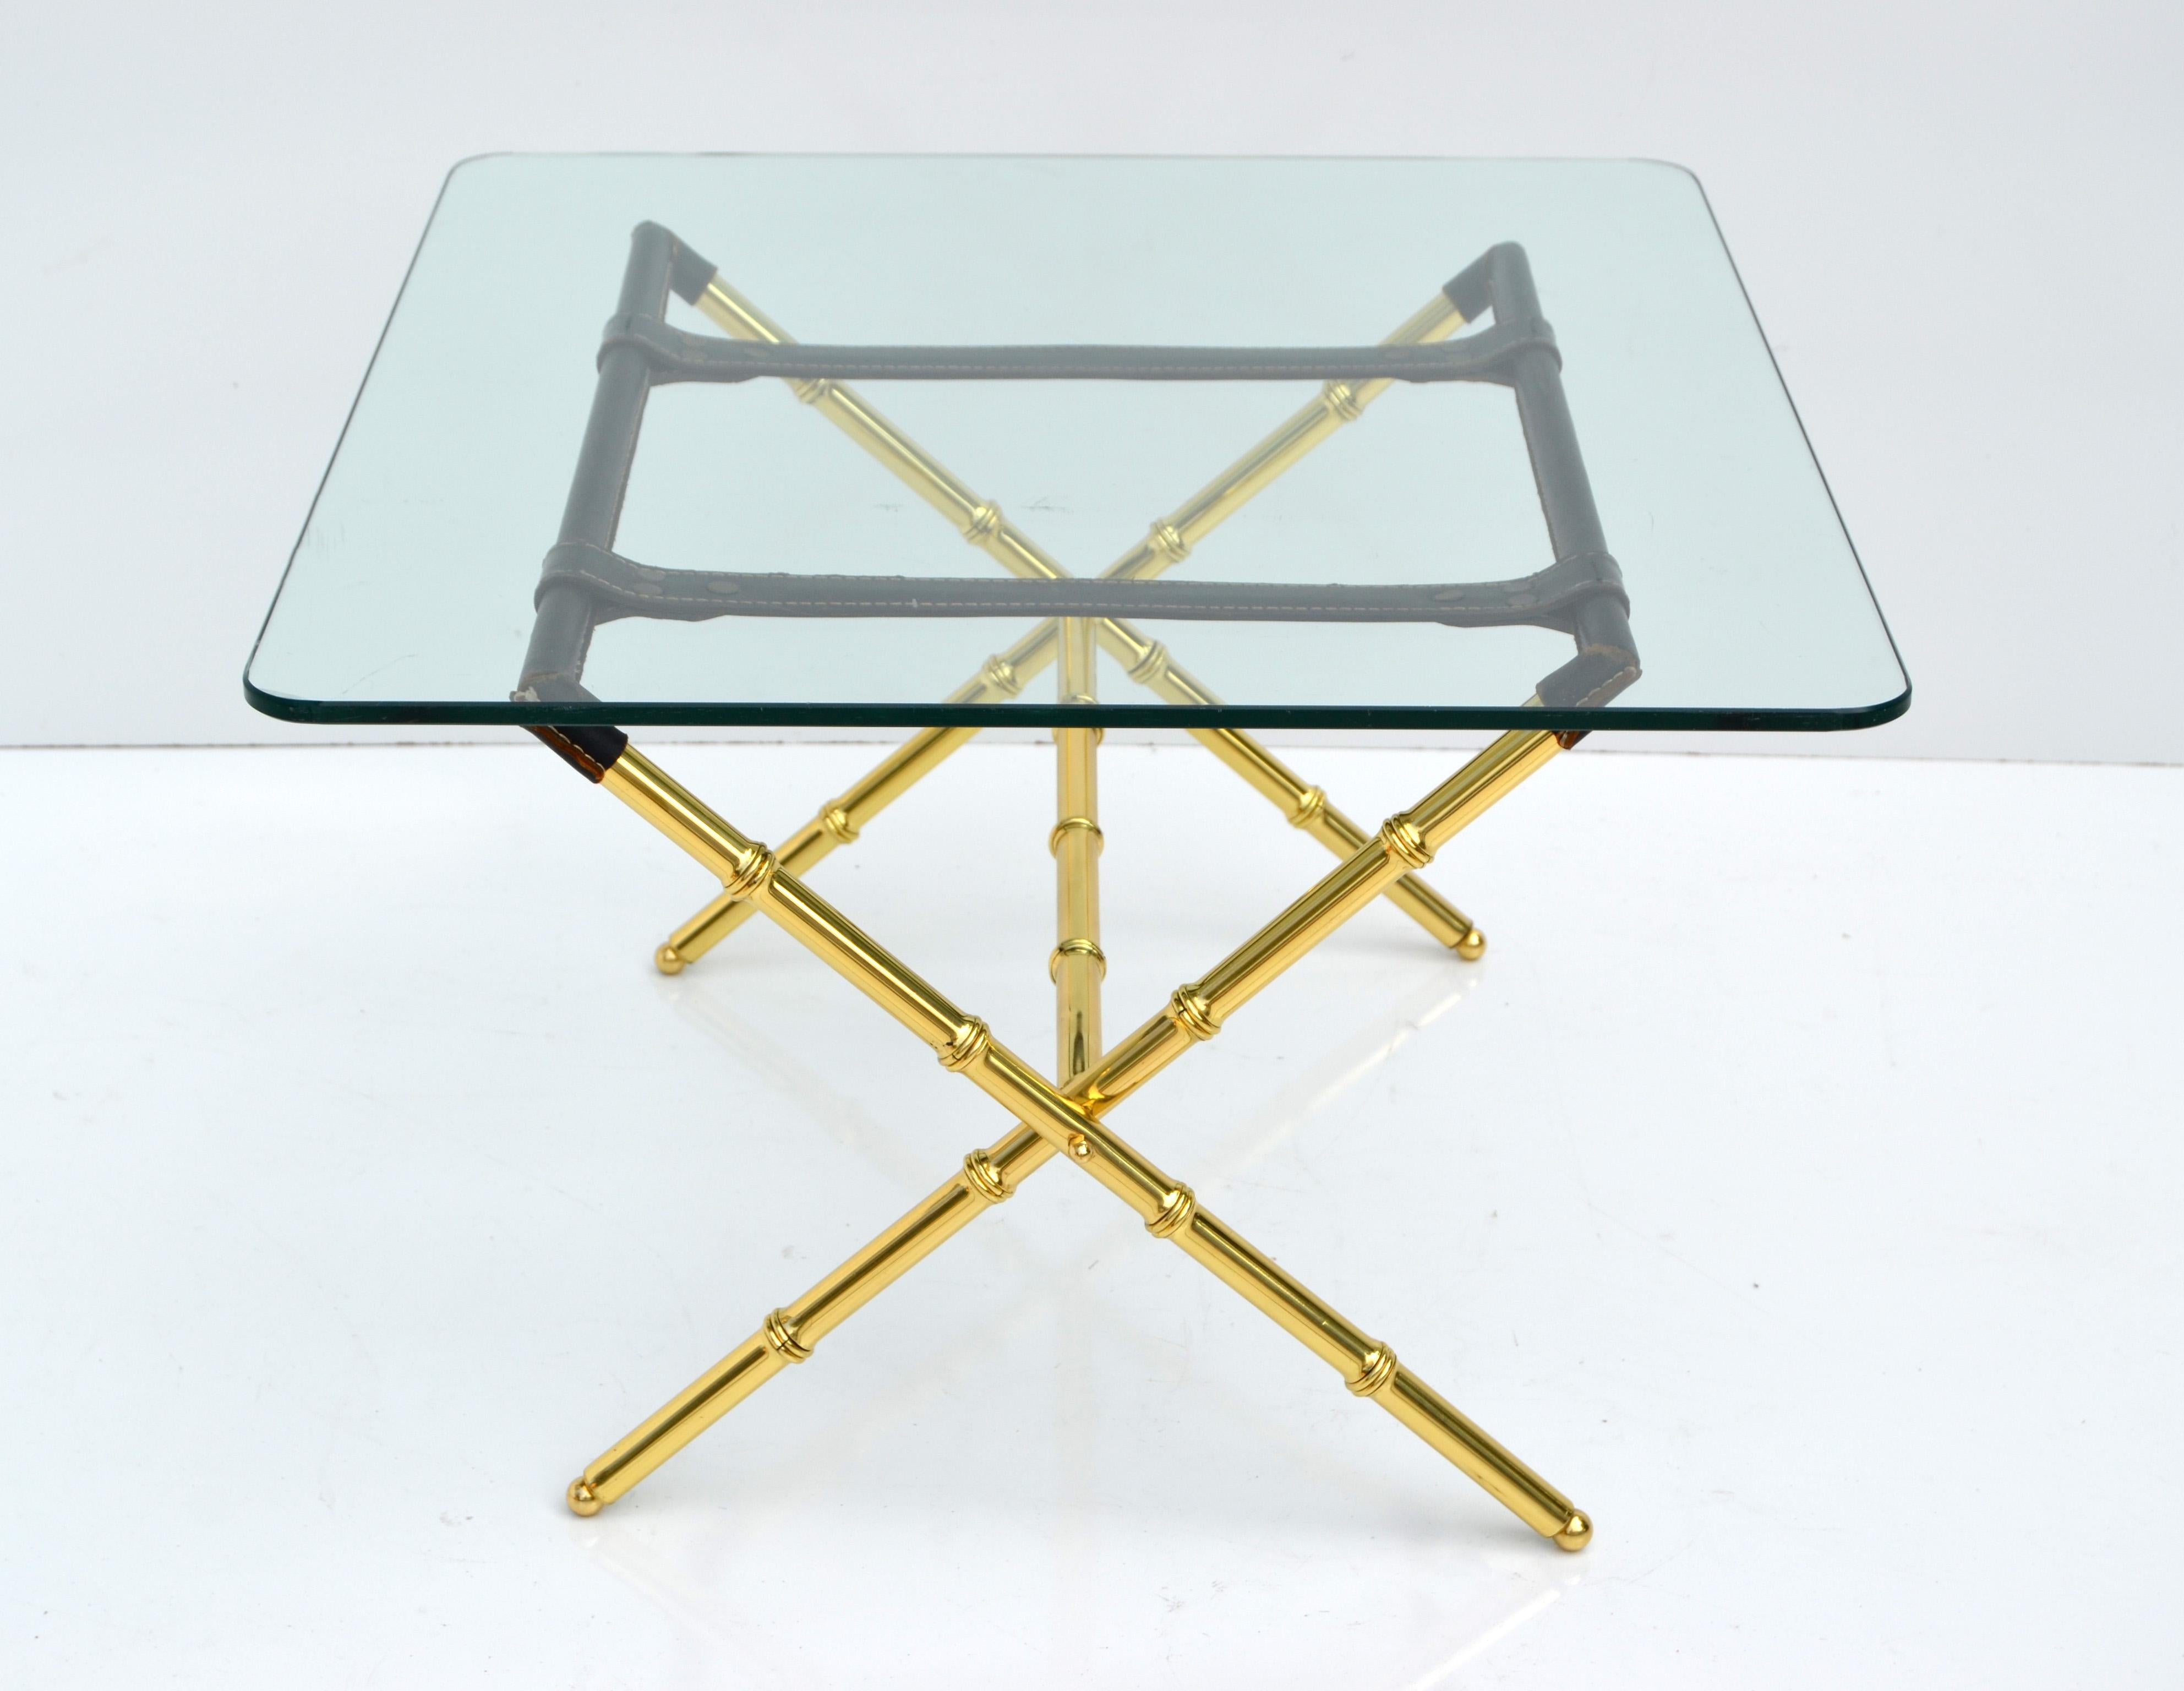 Superb French Jacques Adnet Glass Coffee Table features a polished folding Brass X Base in Faux Bamboo with saddle stitched Leather Bindings.
The Rectangular Glass Top has rounded edges and it is 0.38 inches thick.
The Nickel & Brass Version of